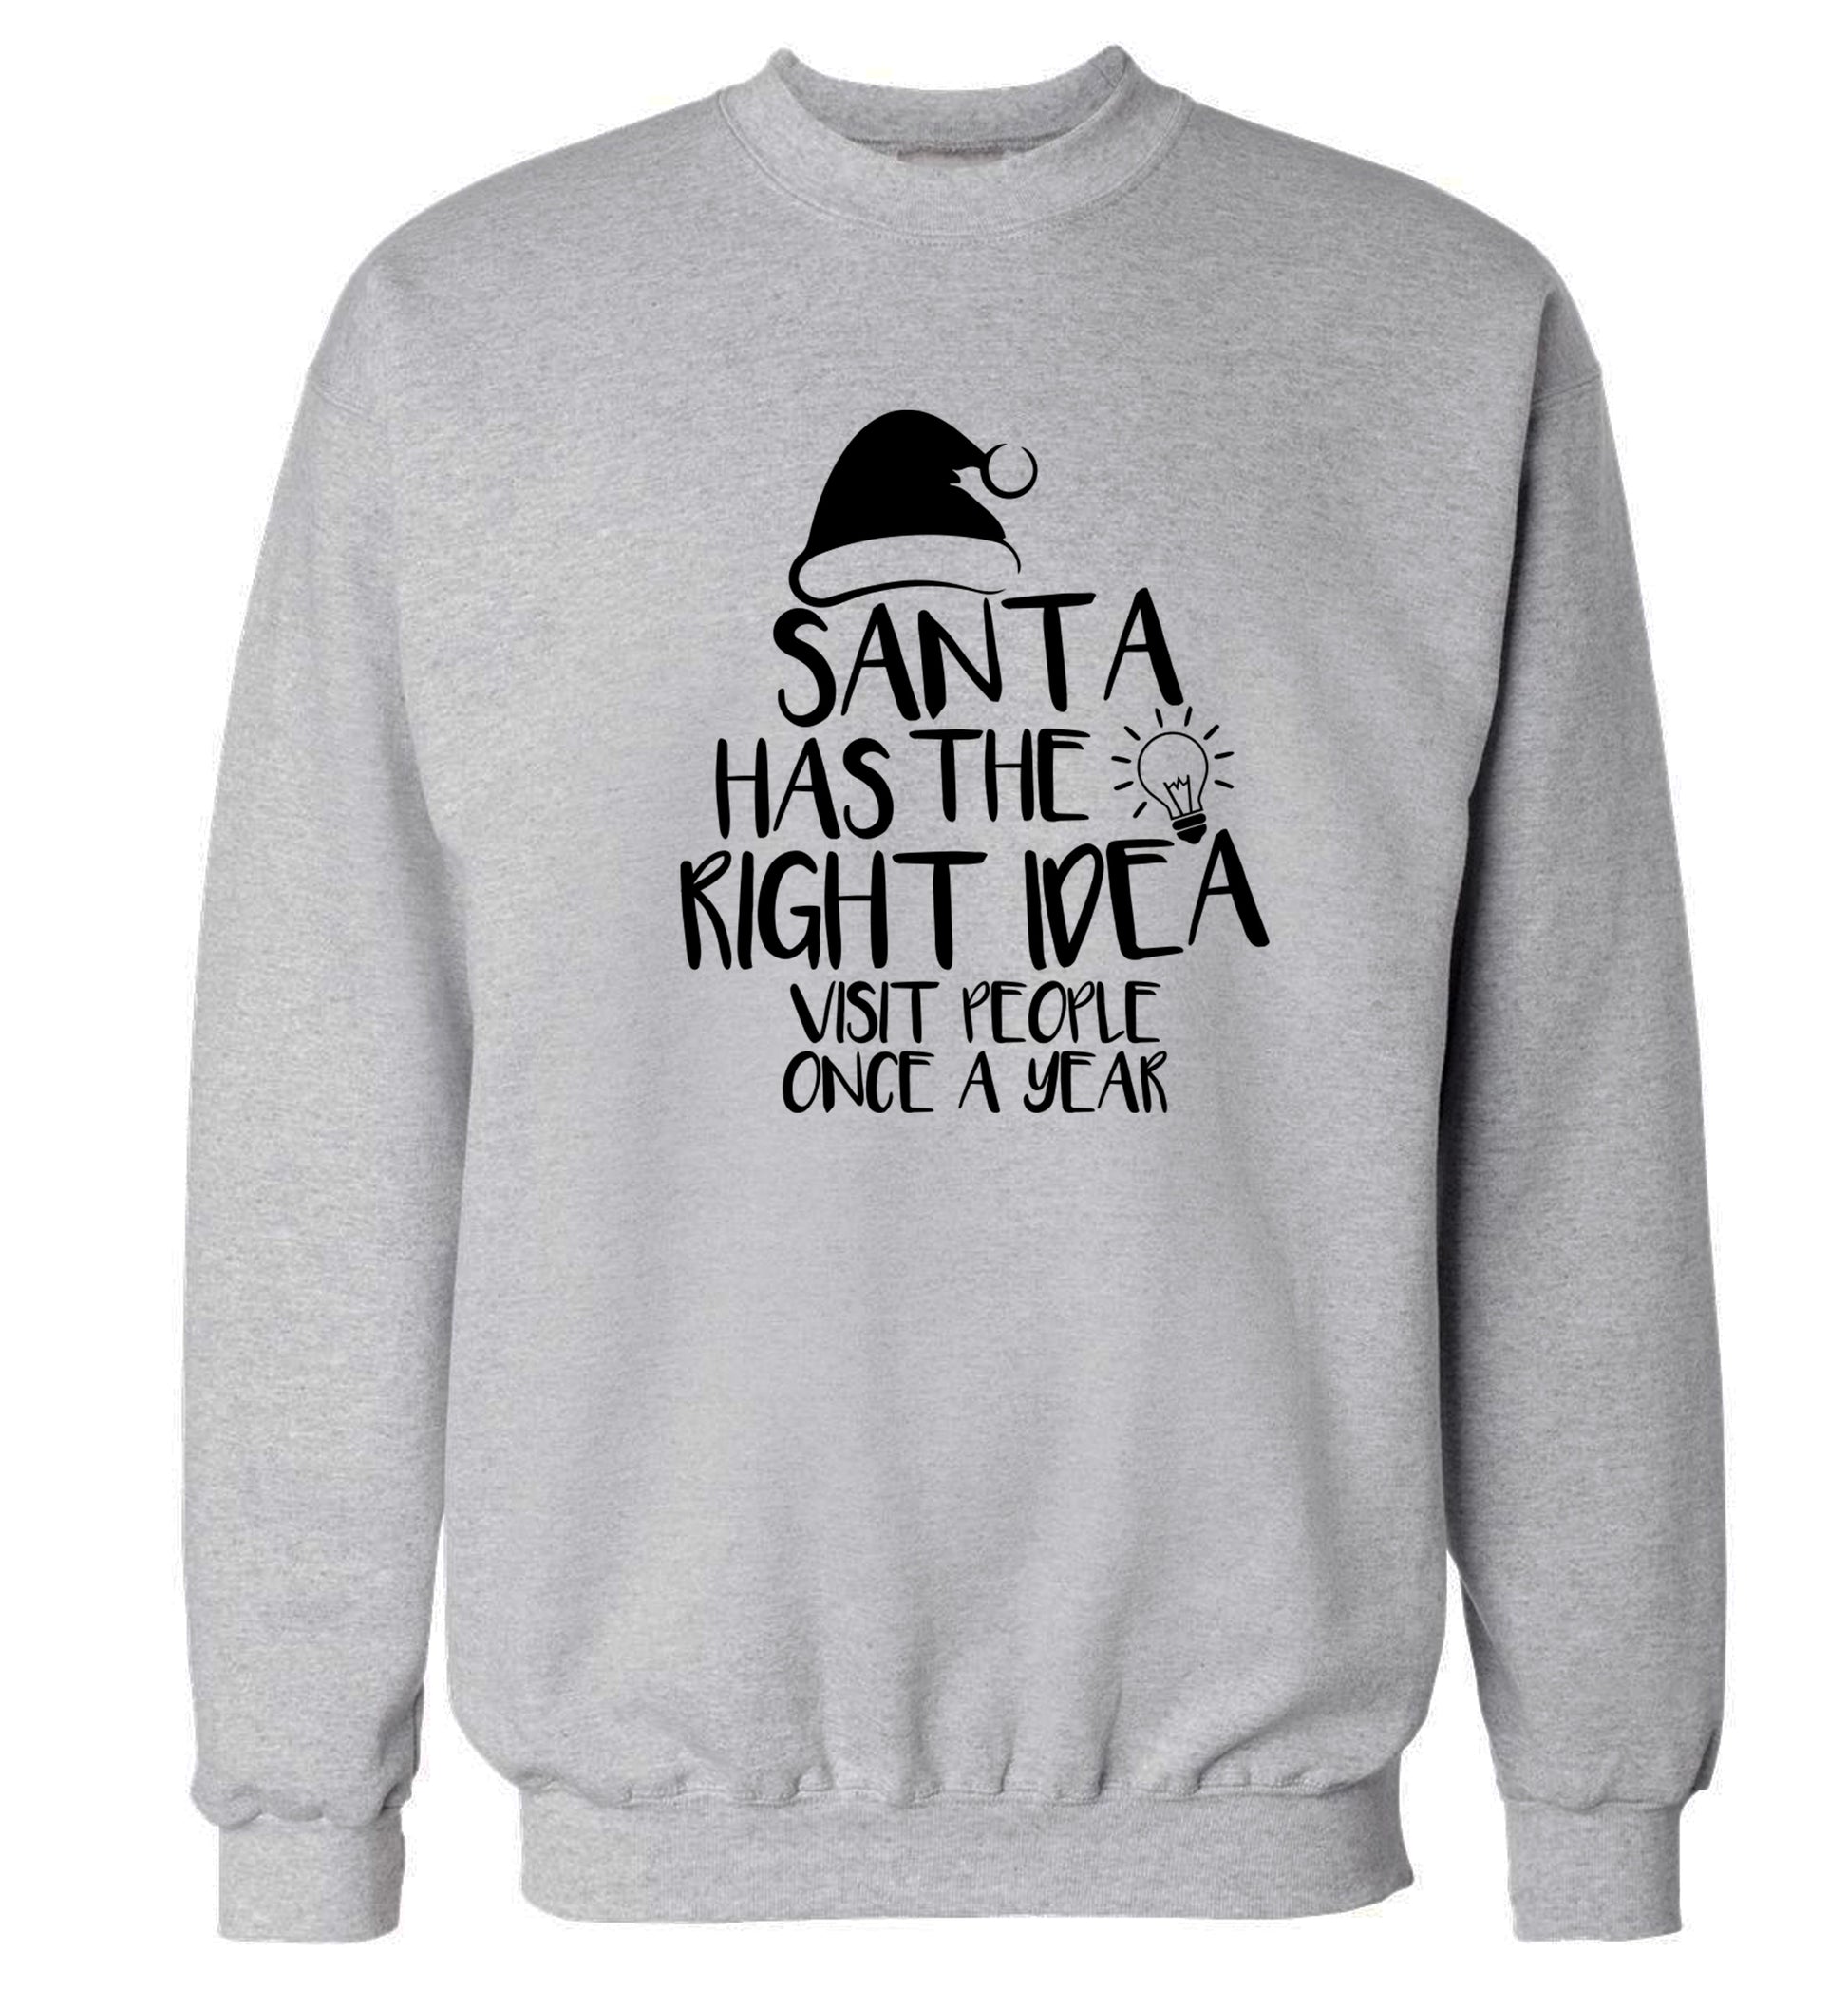 Santa has the right idea visit people once a year Adult's unisex grey Sweater 2XL